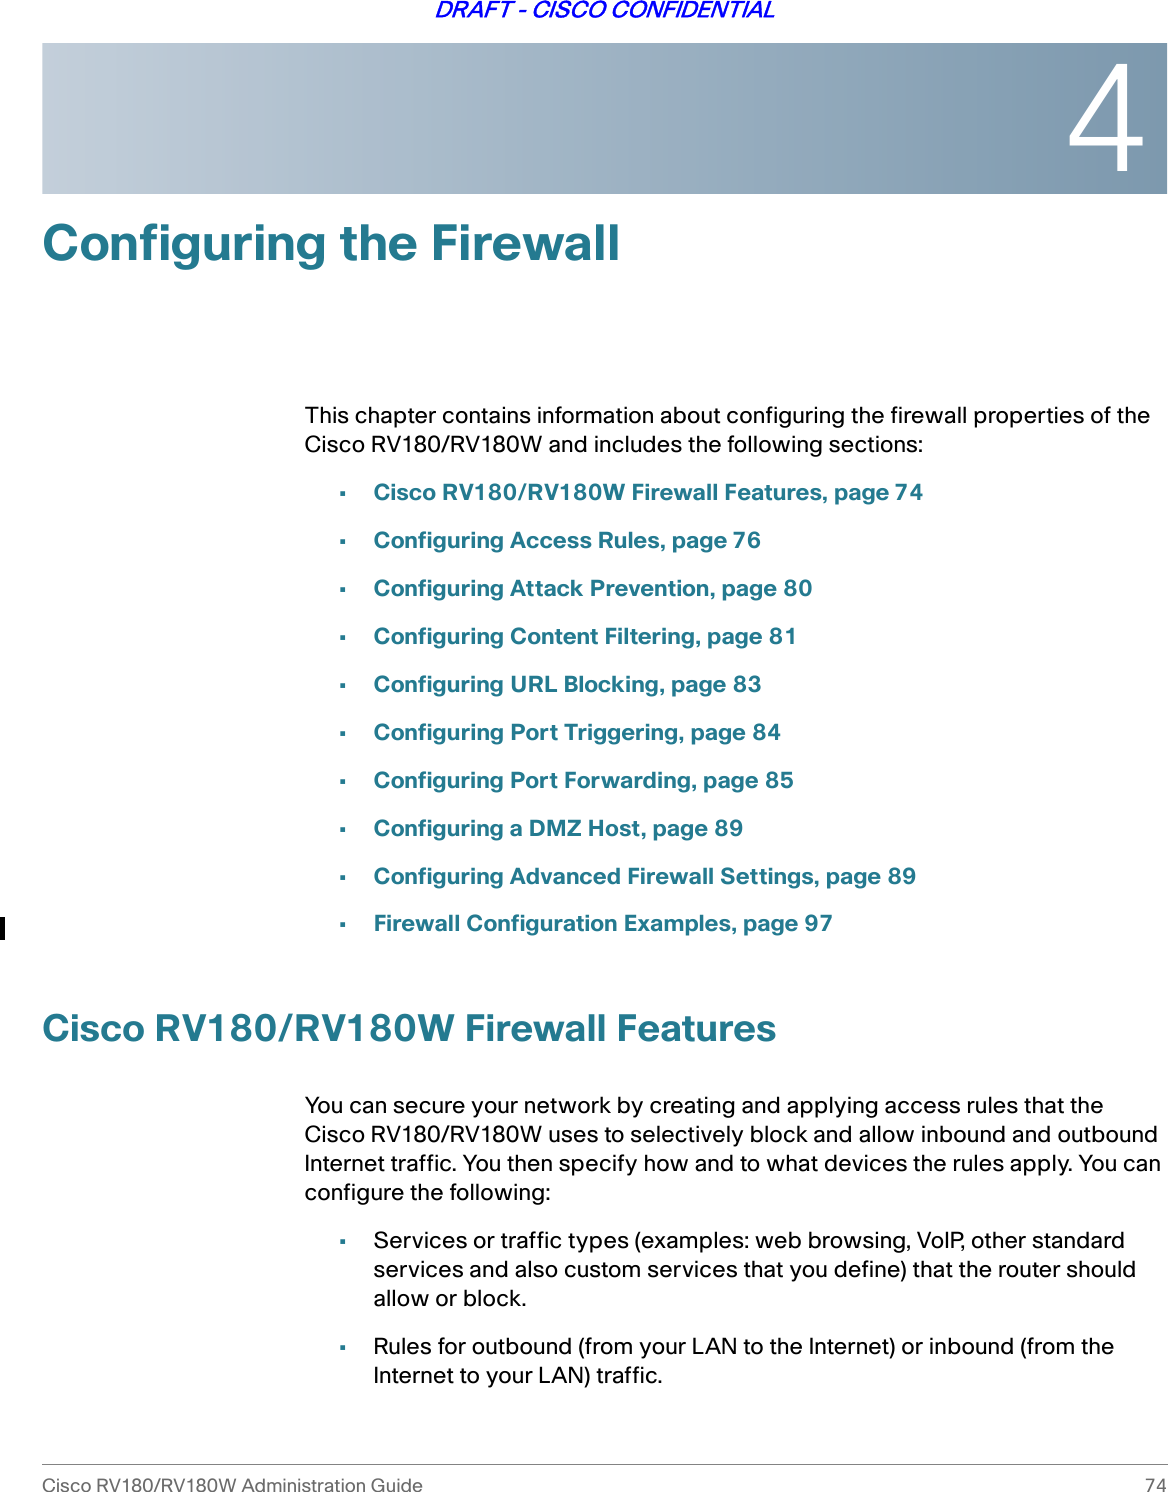 4Cisco RV180/RV180W Administration Guide 74DRAFT - CISCO CONFIDENTIALConfiguring the FirewallThis chapter contains information about configuring the firewall properties of the Cisco RV180/RV180W and includes the following sections:•Cisco RV180/RV180W Firewall Features, page 74•Configuring Access Rules, page 76•Configuring Attack Prevention, page 80•Configuring Content Filtering, page 81•Configuring URL Blocking, page 83•Configuring Port Triggering, page 84•Configuring Port Forwarding, page 85•Configuring a DMZ Host, page 89•Configuring Advanced Firewall Settings, page 89•Firewall Configuration Examples, page 97Cisco RV180/RV180W Firewall FeaturesYou can secure your network by creating and applying access rules that theCisco RV180/RV180W uses to selectively block and allow inbound and outbound Internet traffic. You then specify how and to what devices the rules apply. You can configure the following:•Services or traffic types (examples: web browsing, VoIP, other standard services and also custom services that you define) that the router should allow or block.•Rules for outbound (from your LAN to the Internet) or inbound (from the Internet to your LAN) traffic.